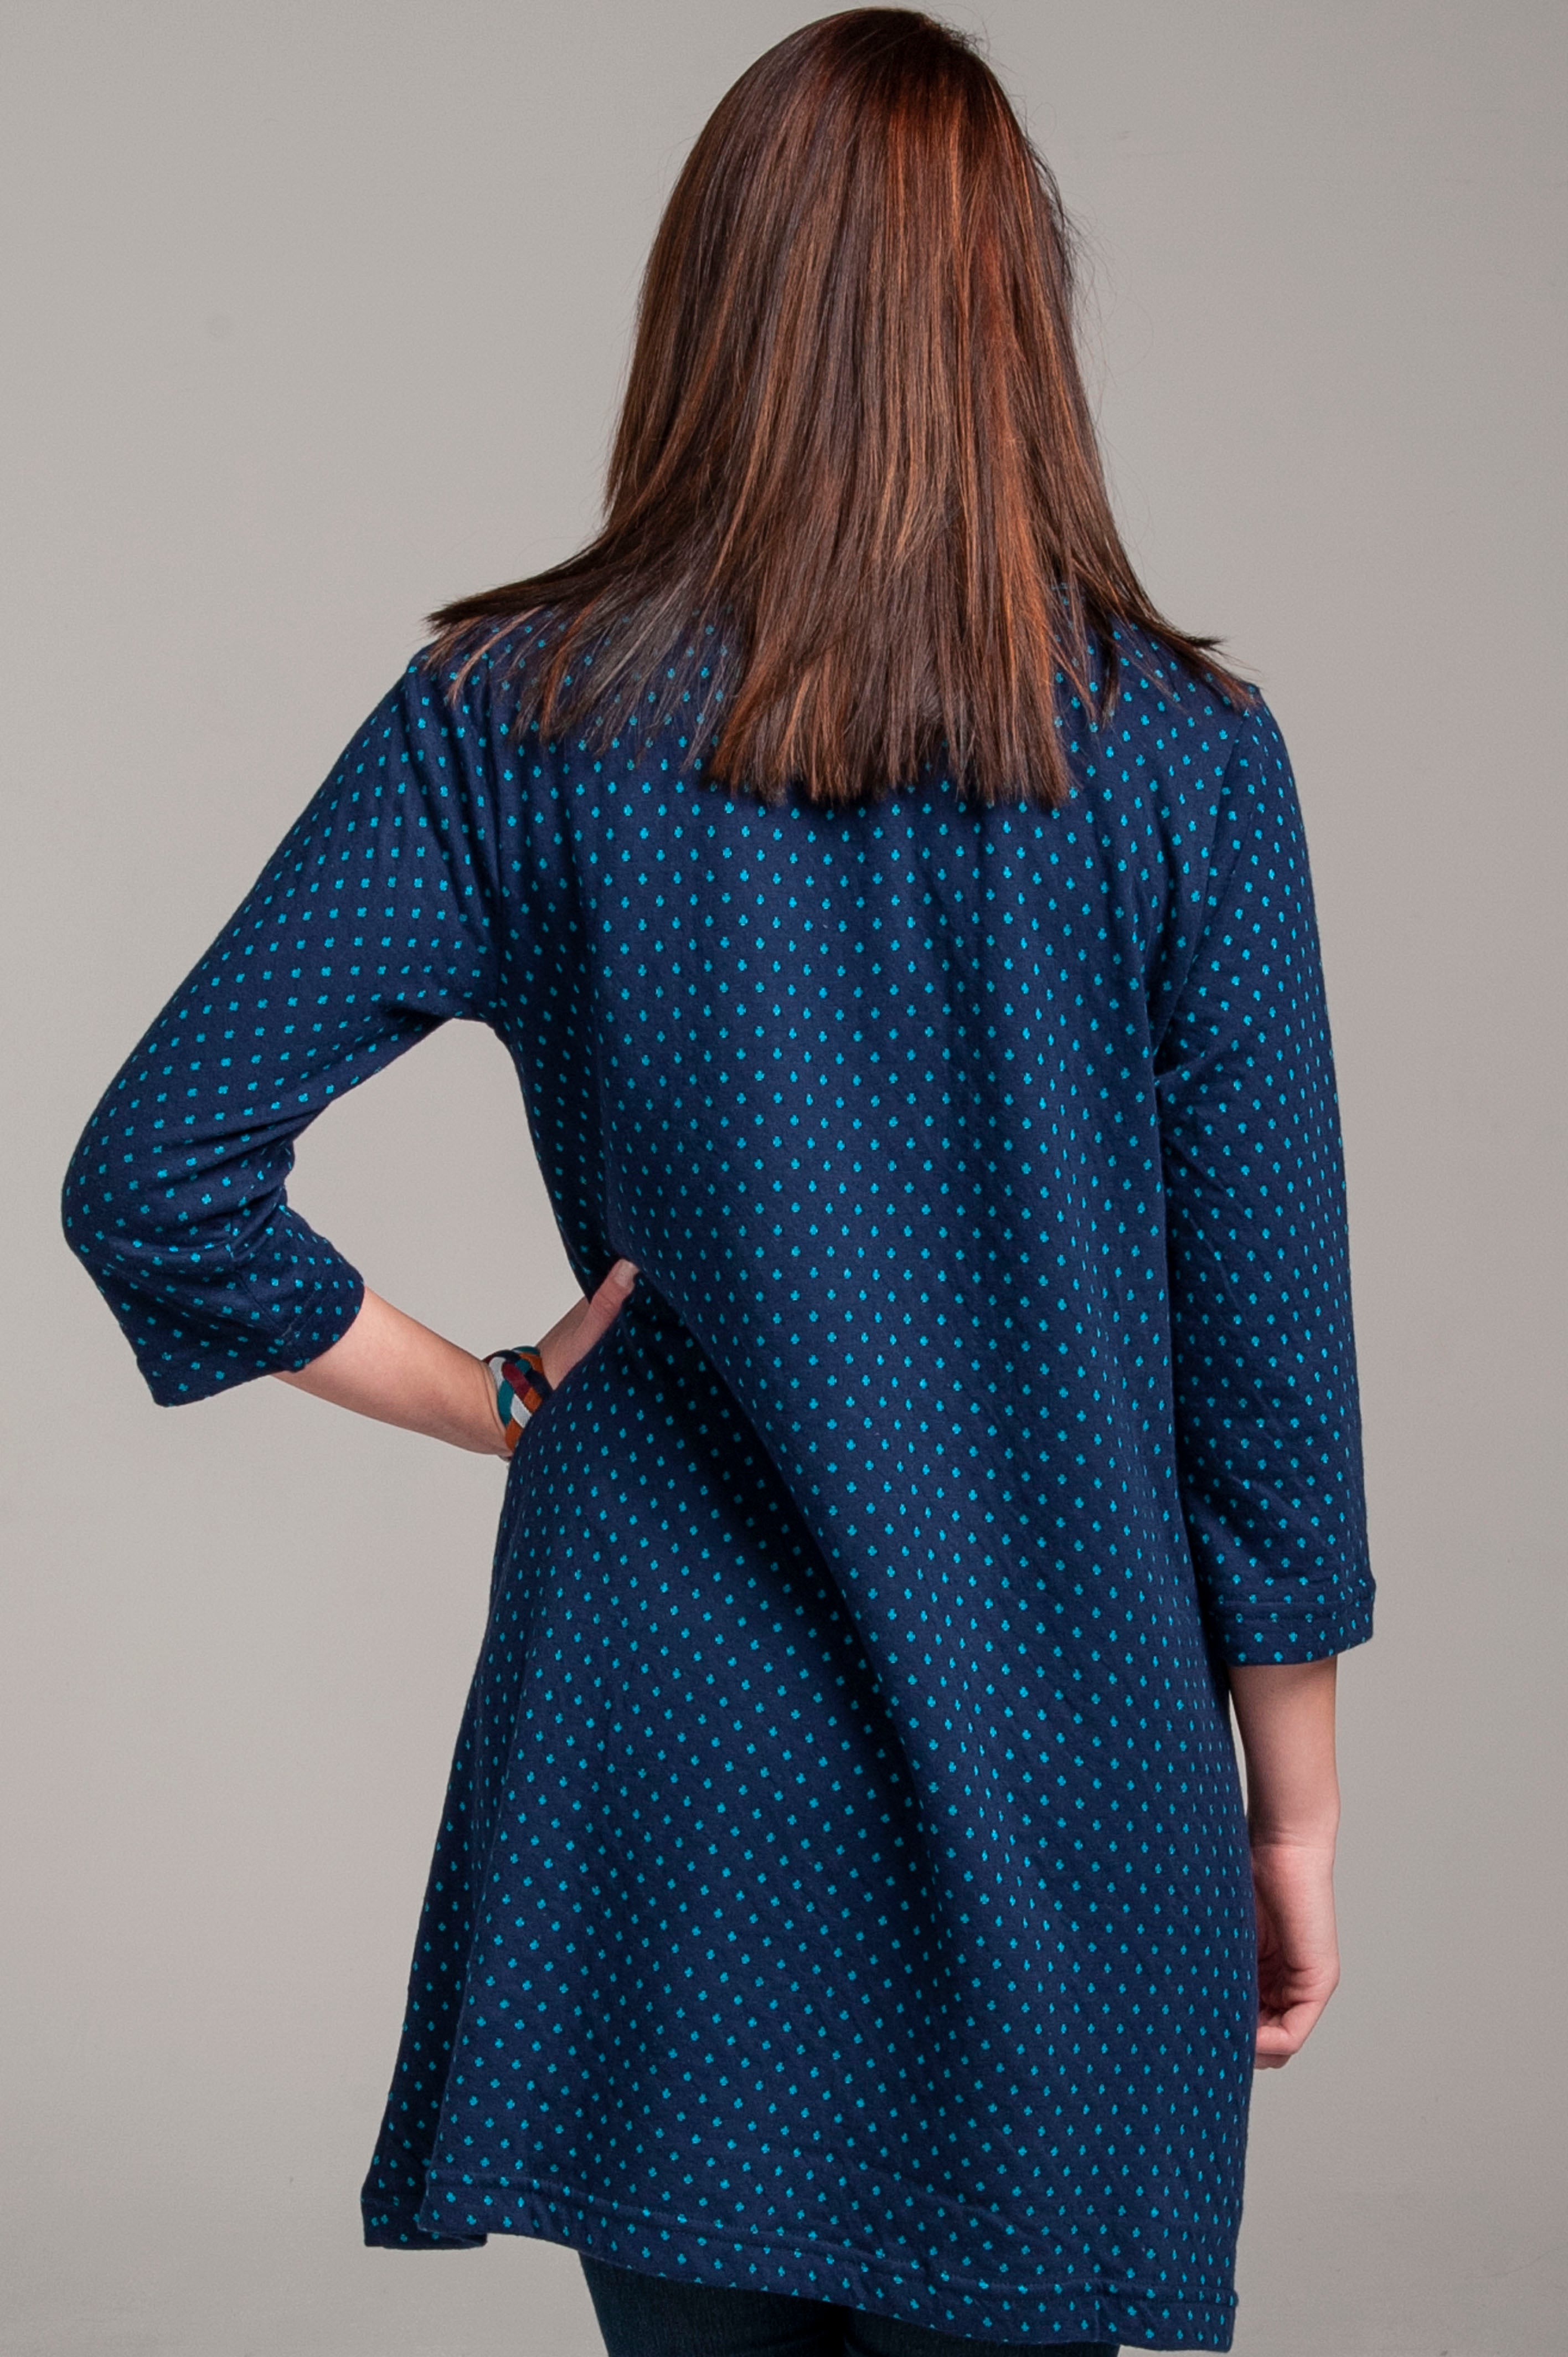 Dotted Cowl Neck Tunic